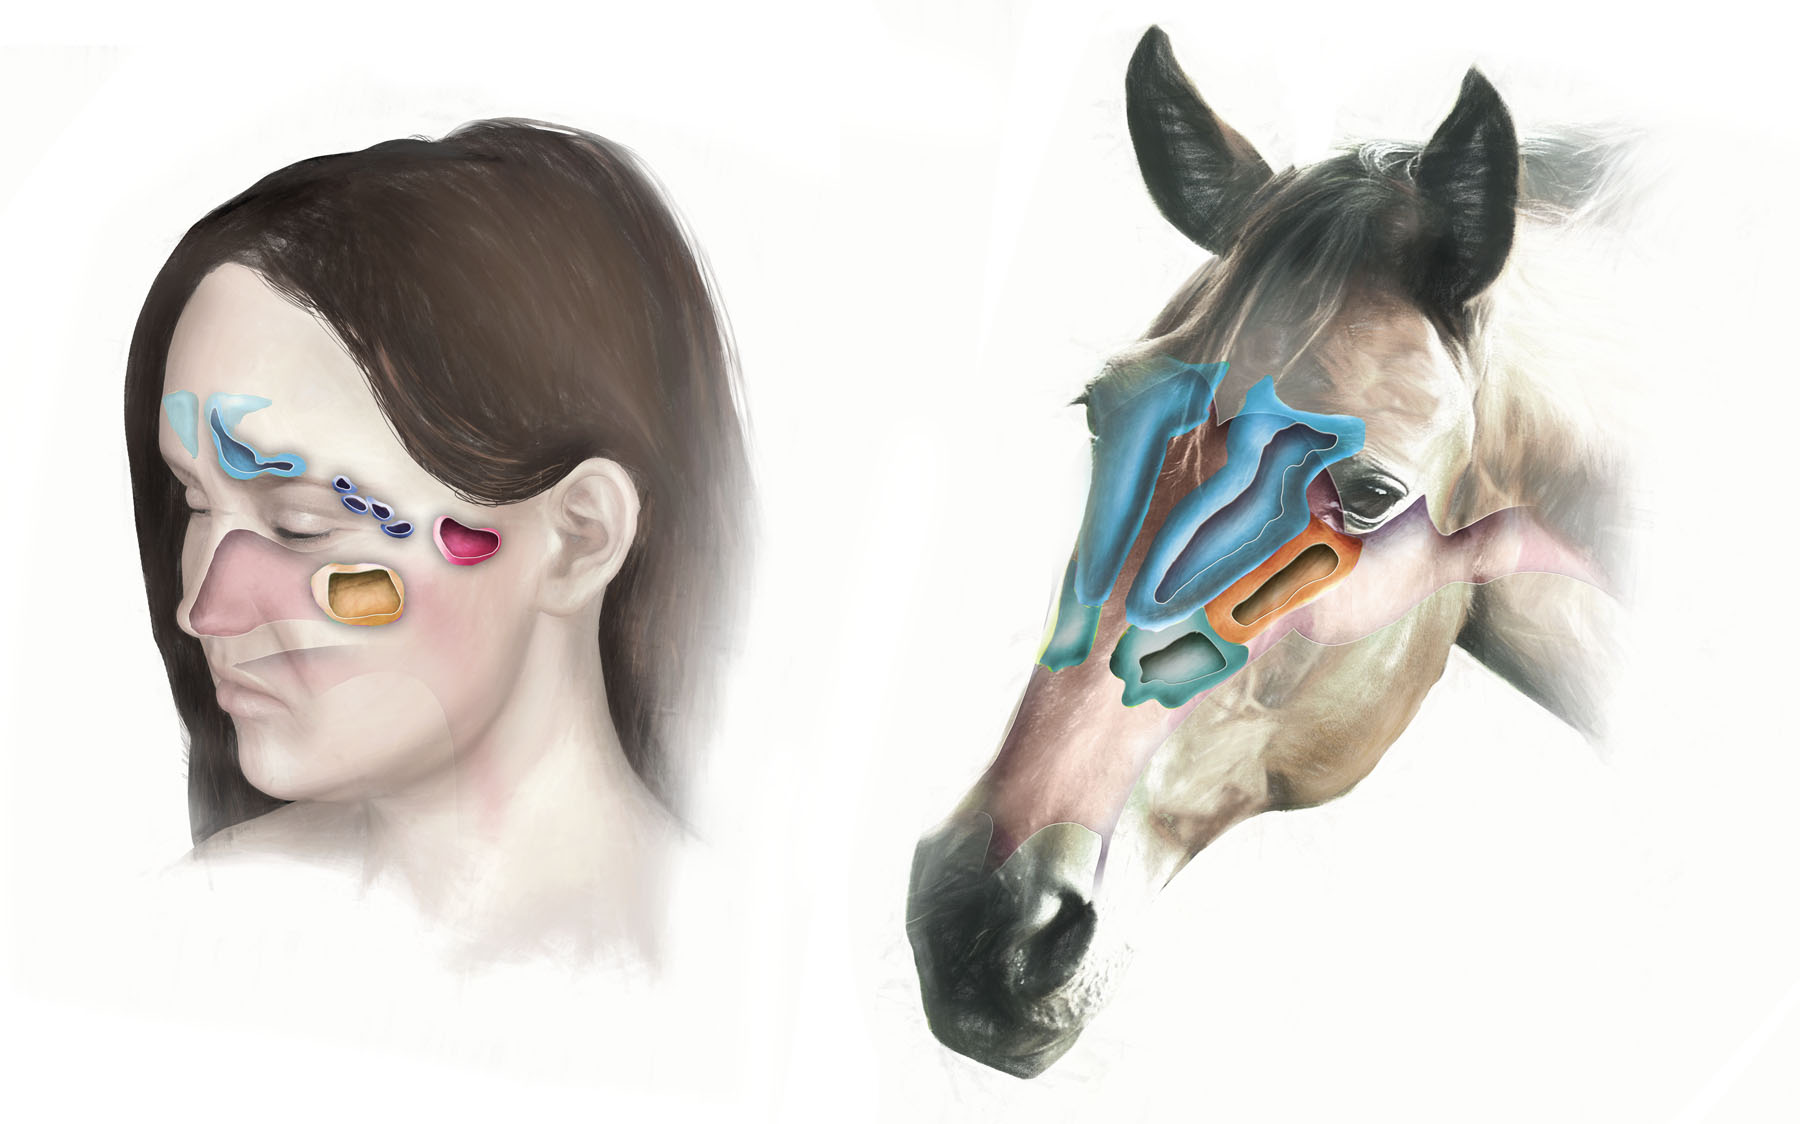 An illustration comparing the sinuses of humans and horses.